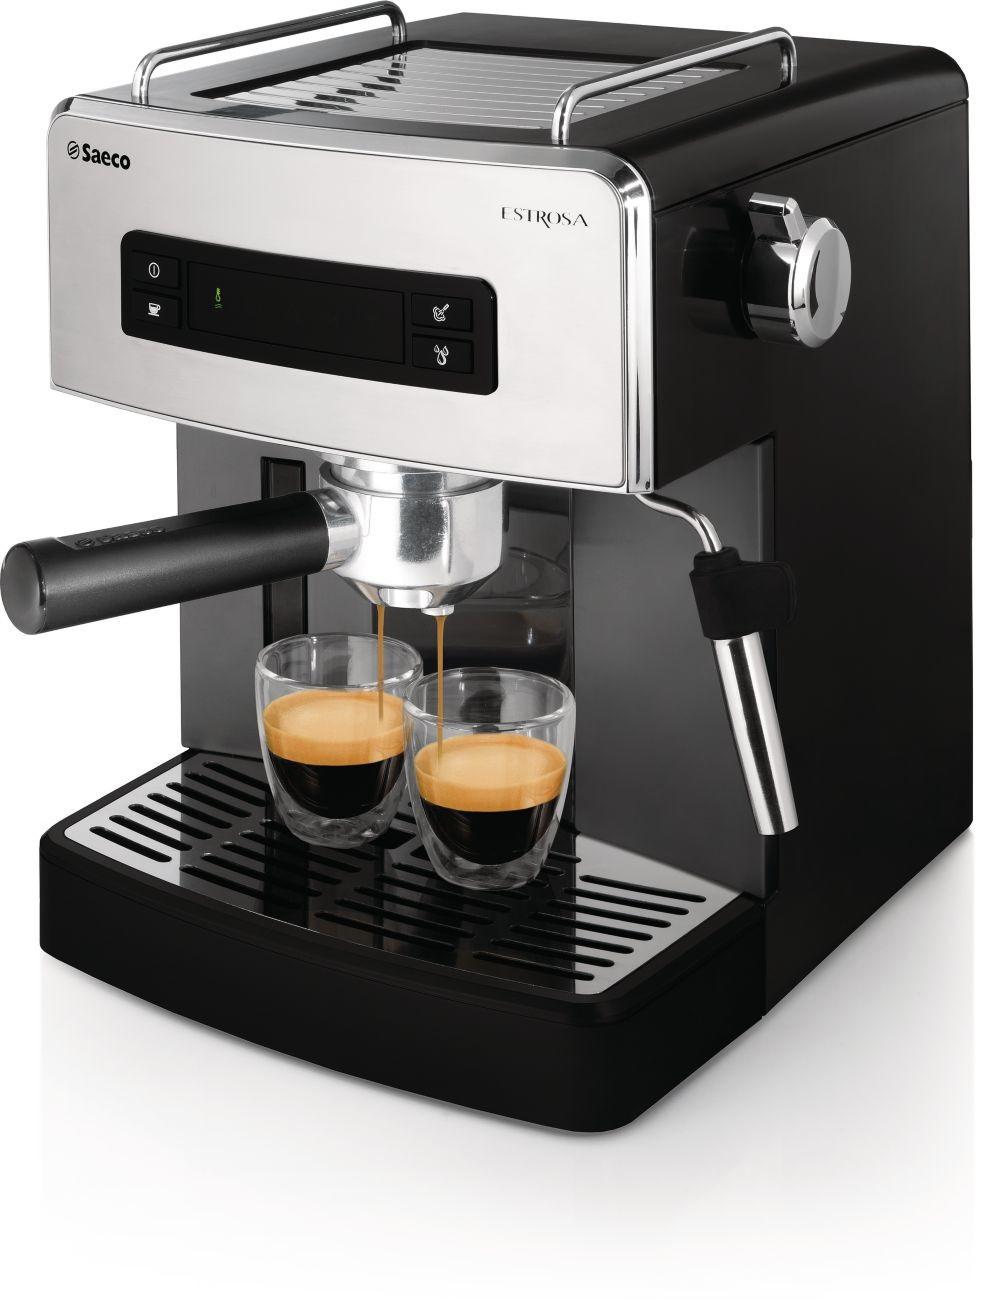 Foto Philips Saeco Hd8525/01 Cafetera Electrica